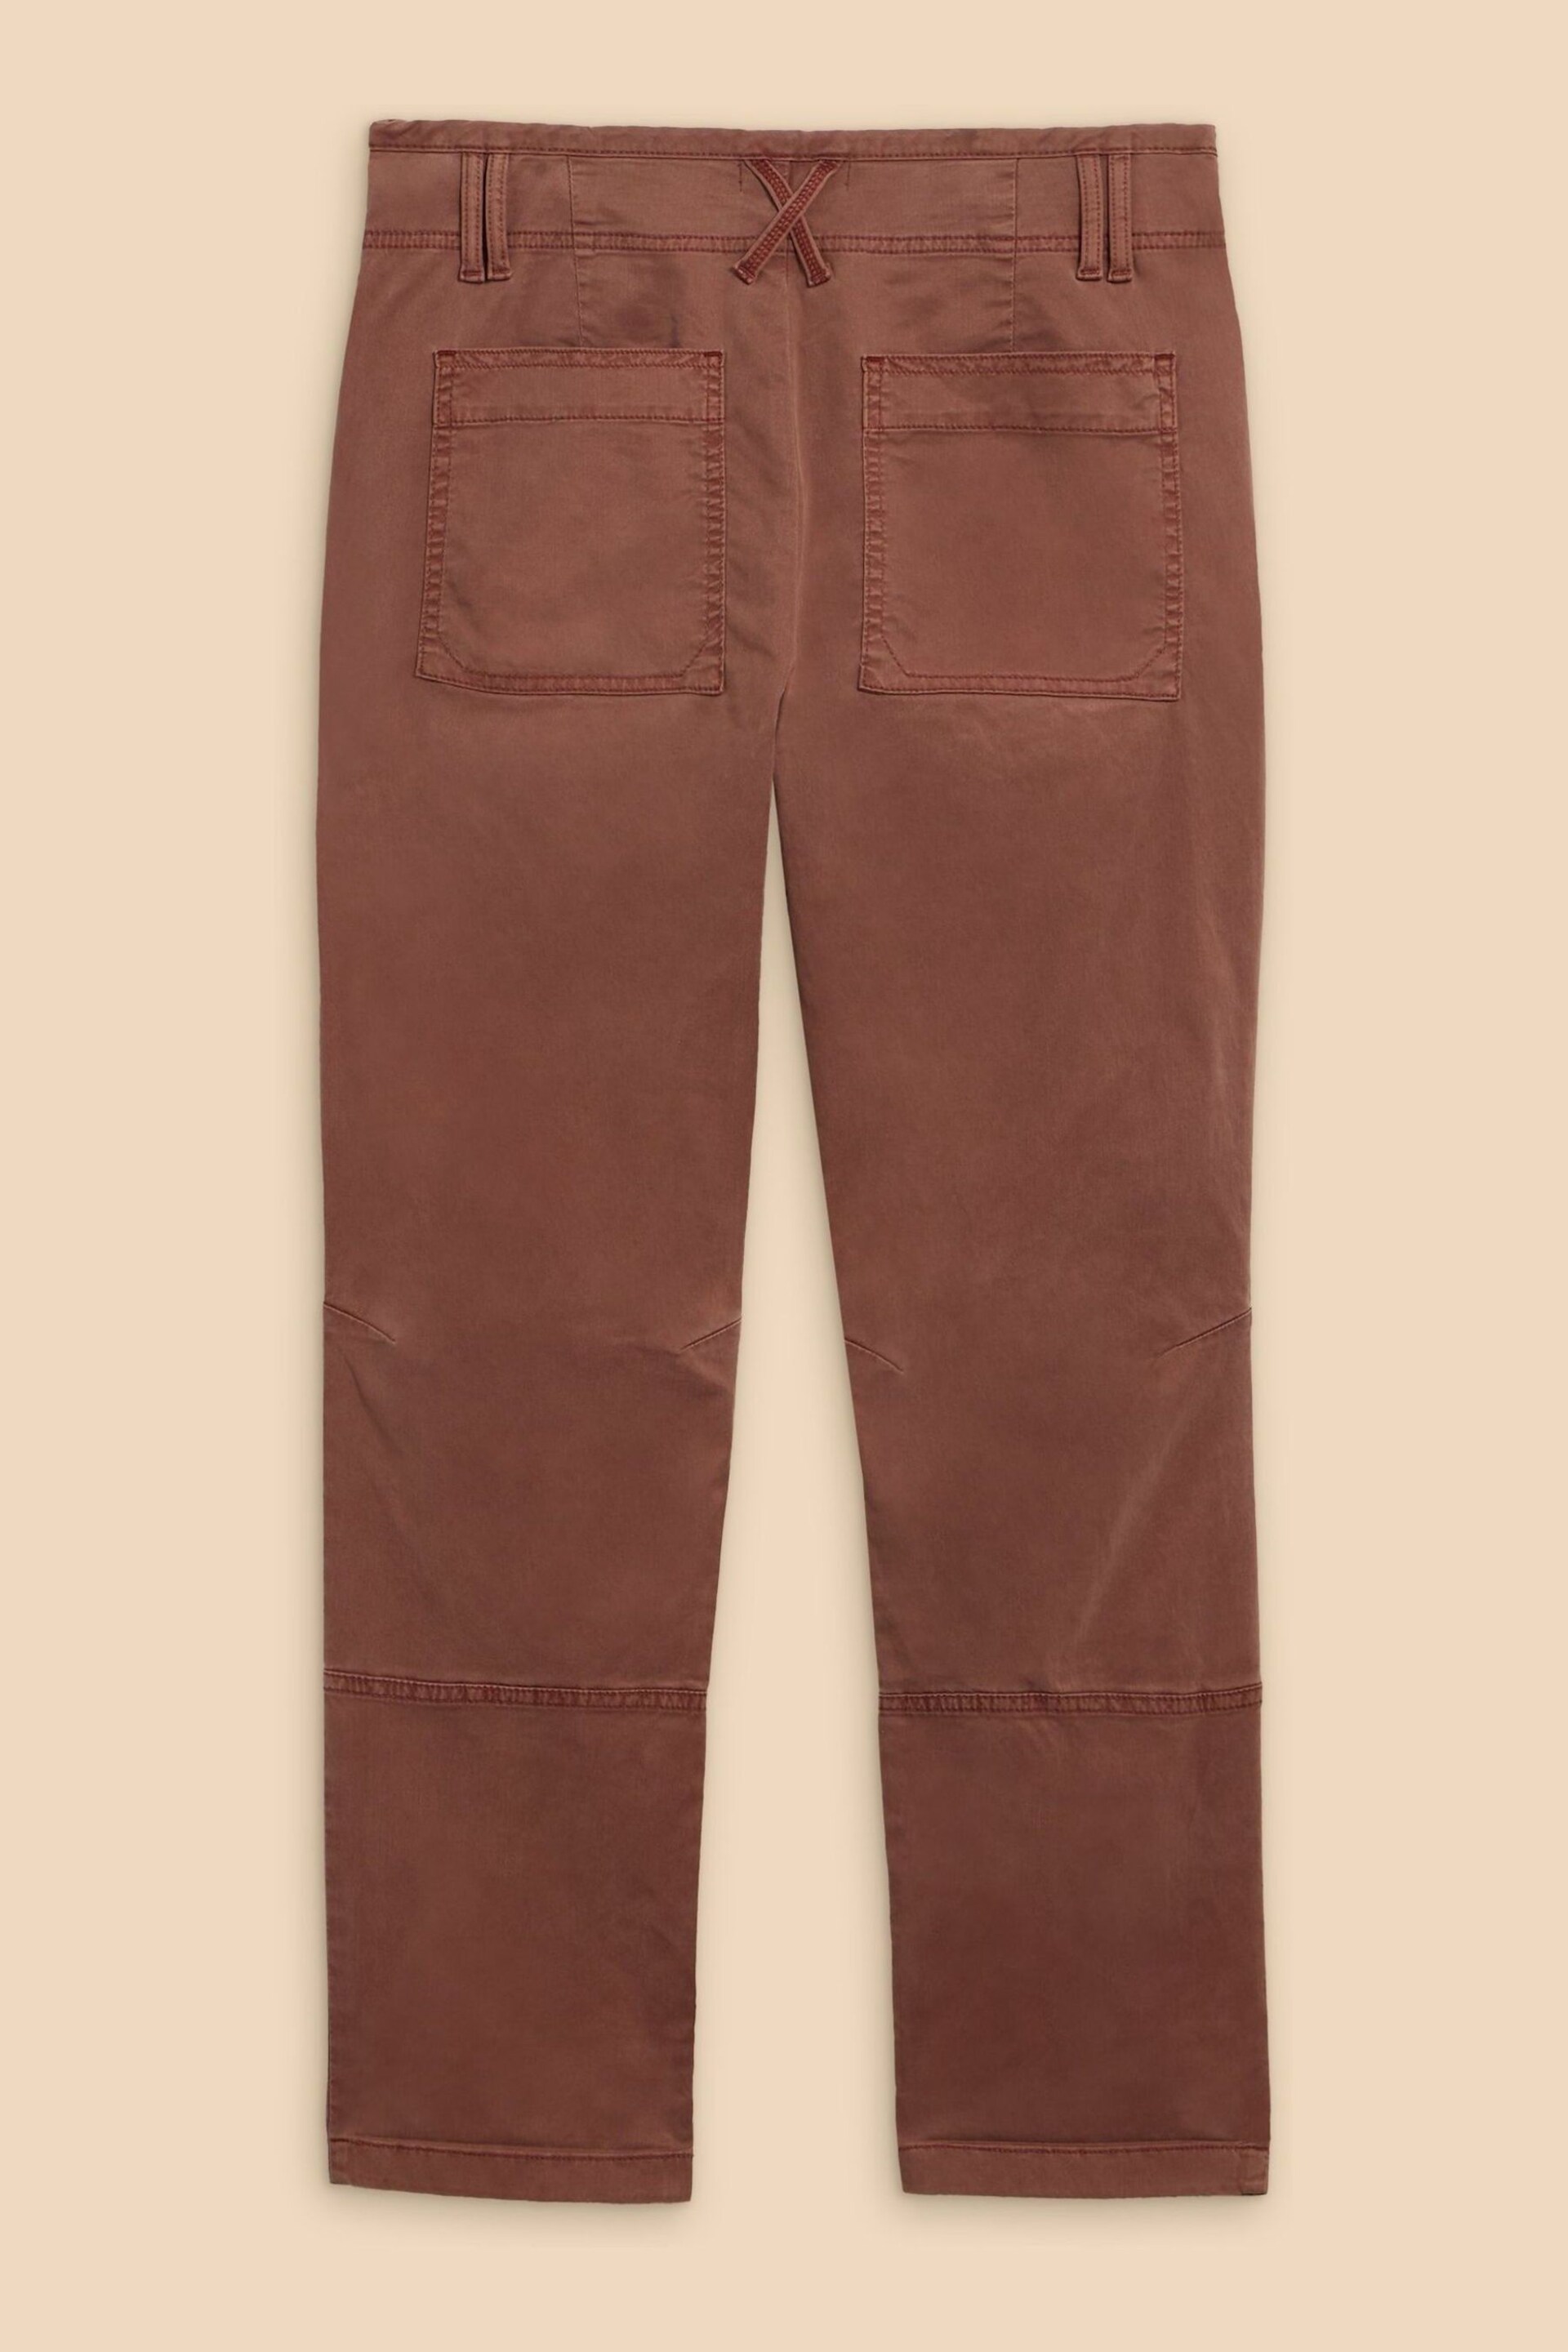 White Stuff Brown Blaire Trousers - Image 6 of 7